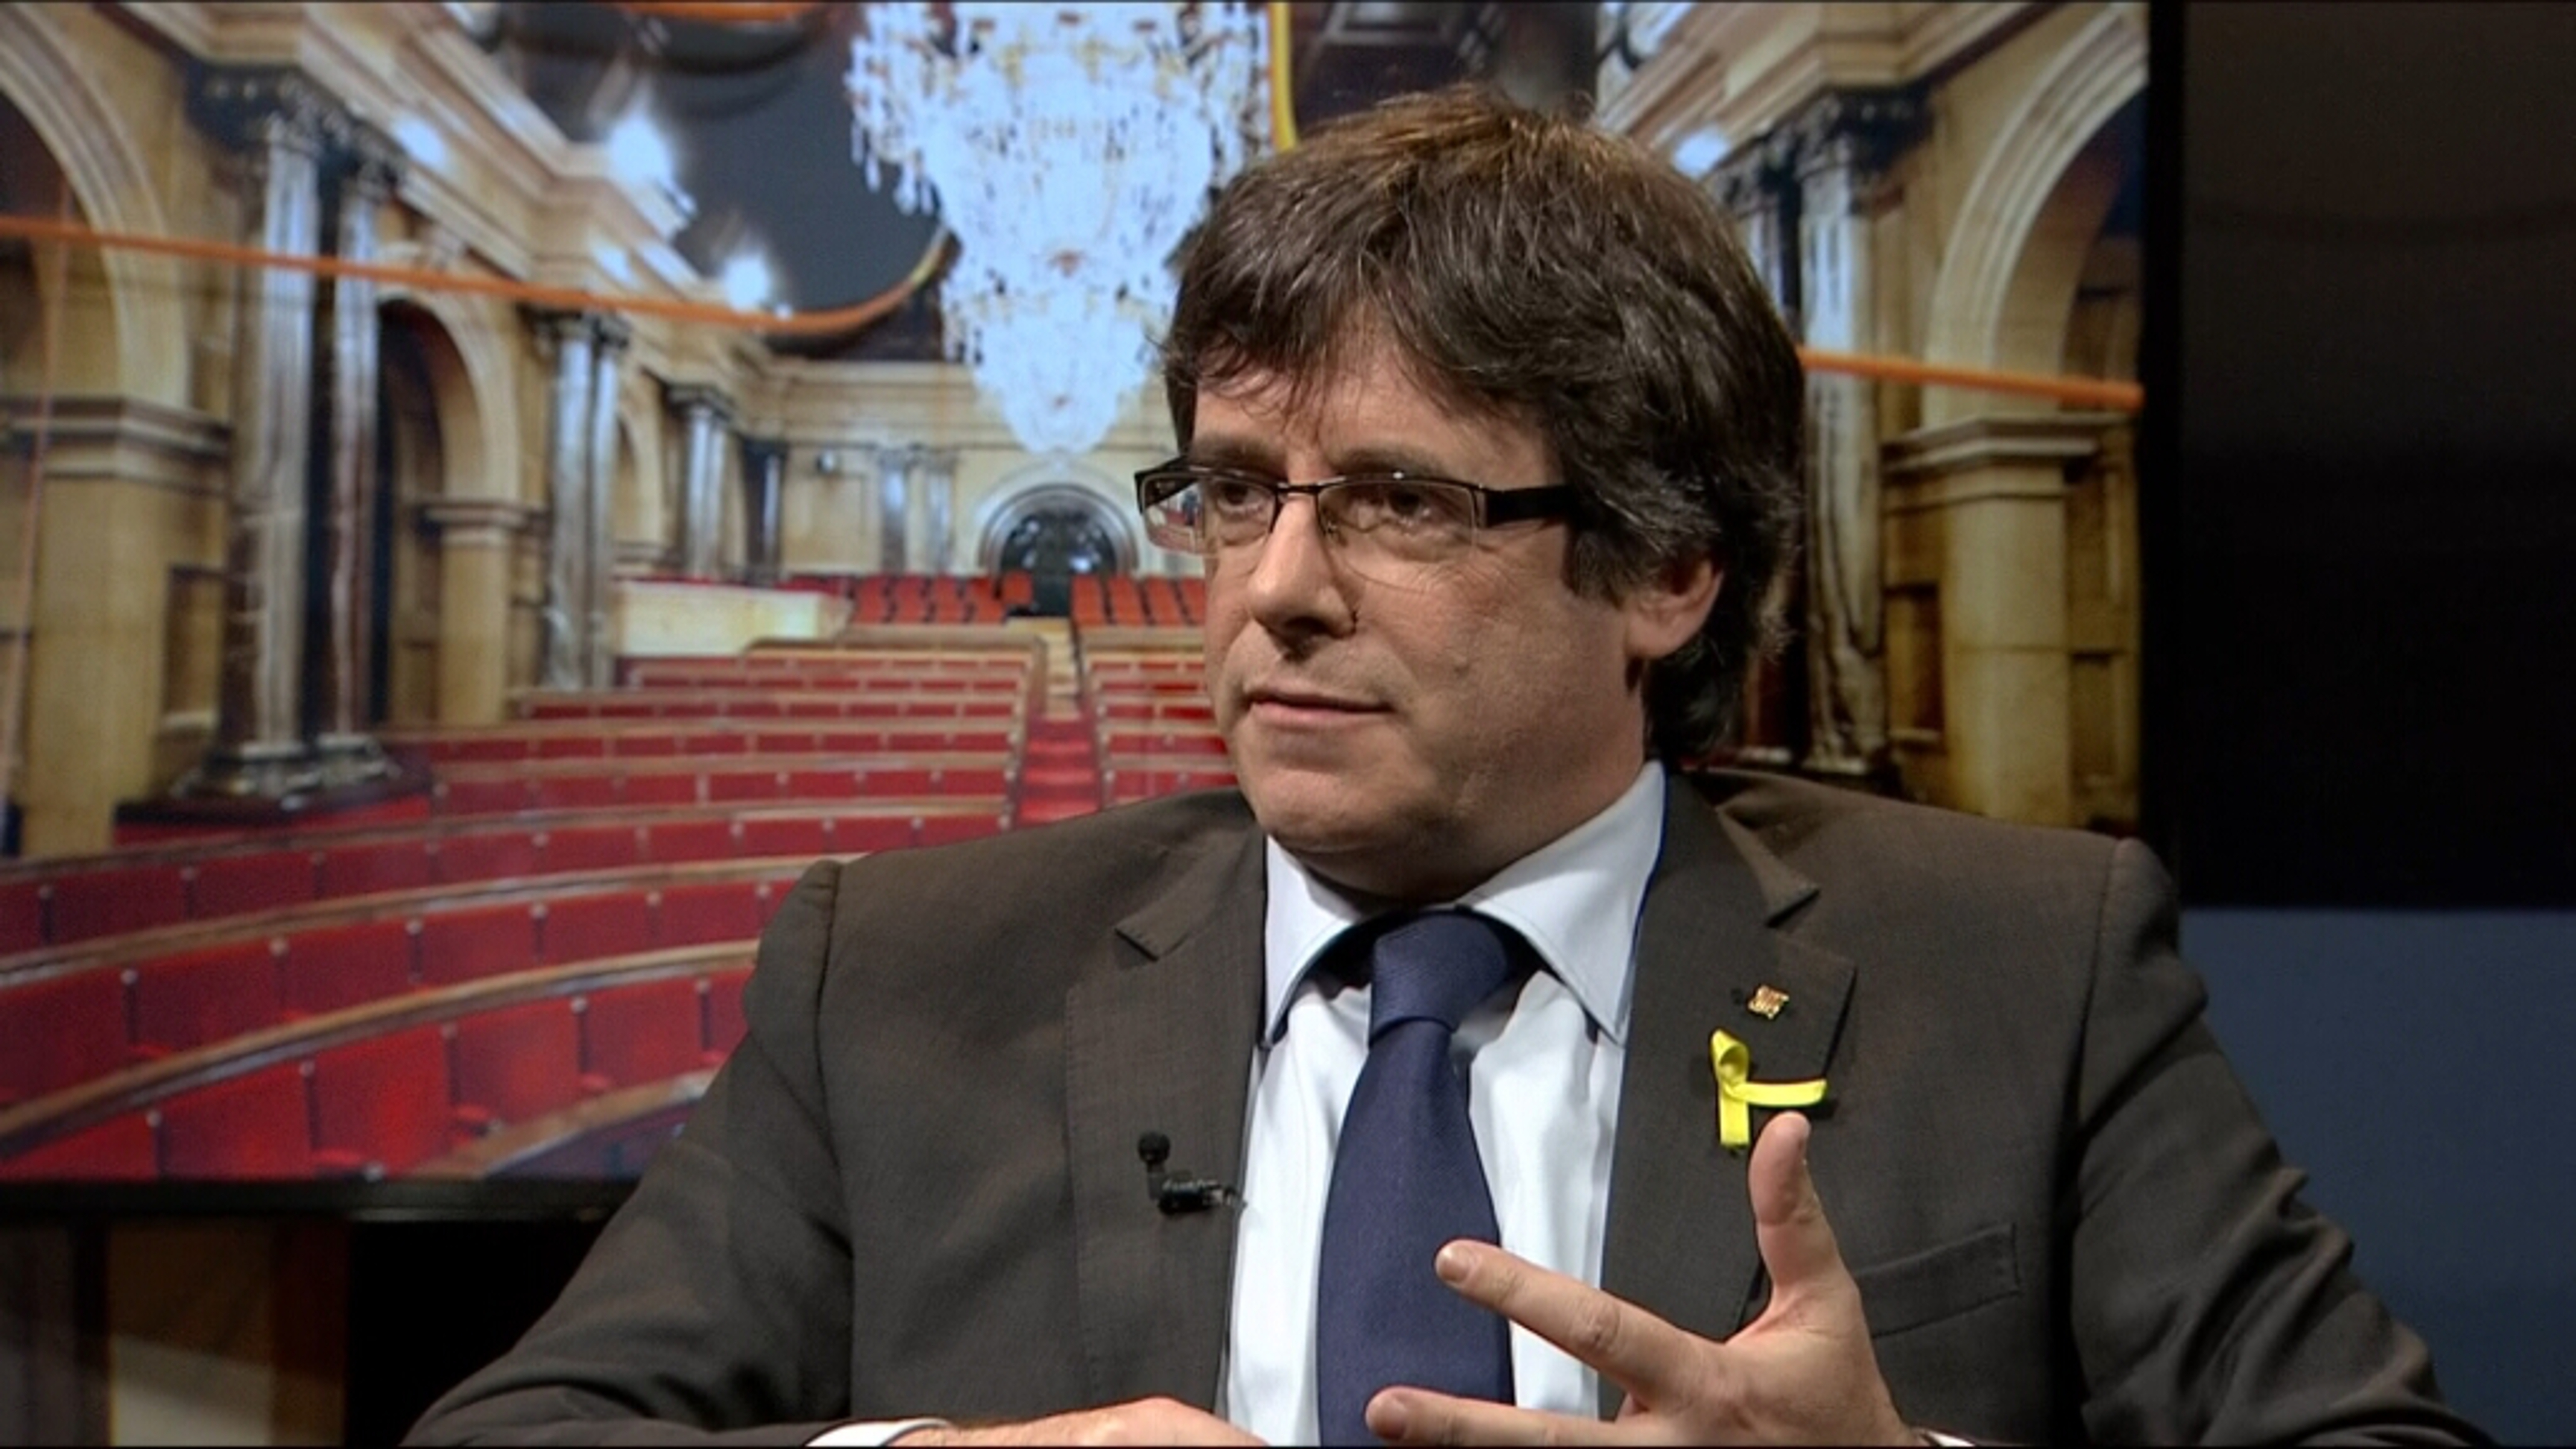 Catalan leader Carles Puigdemont during the interview with TV3 (by TV3)